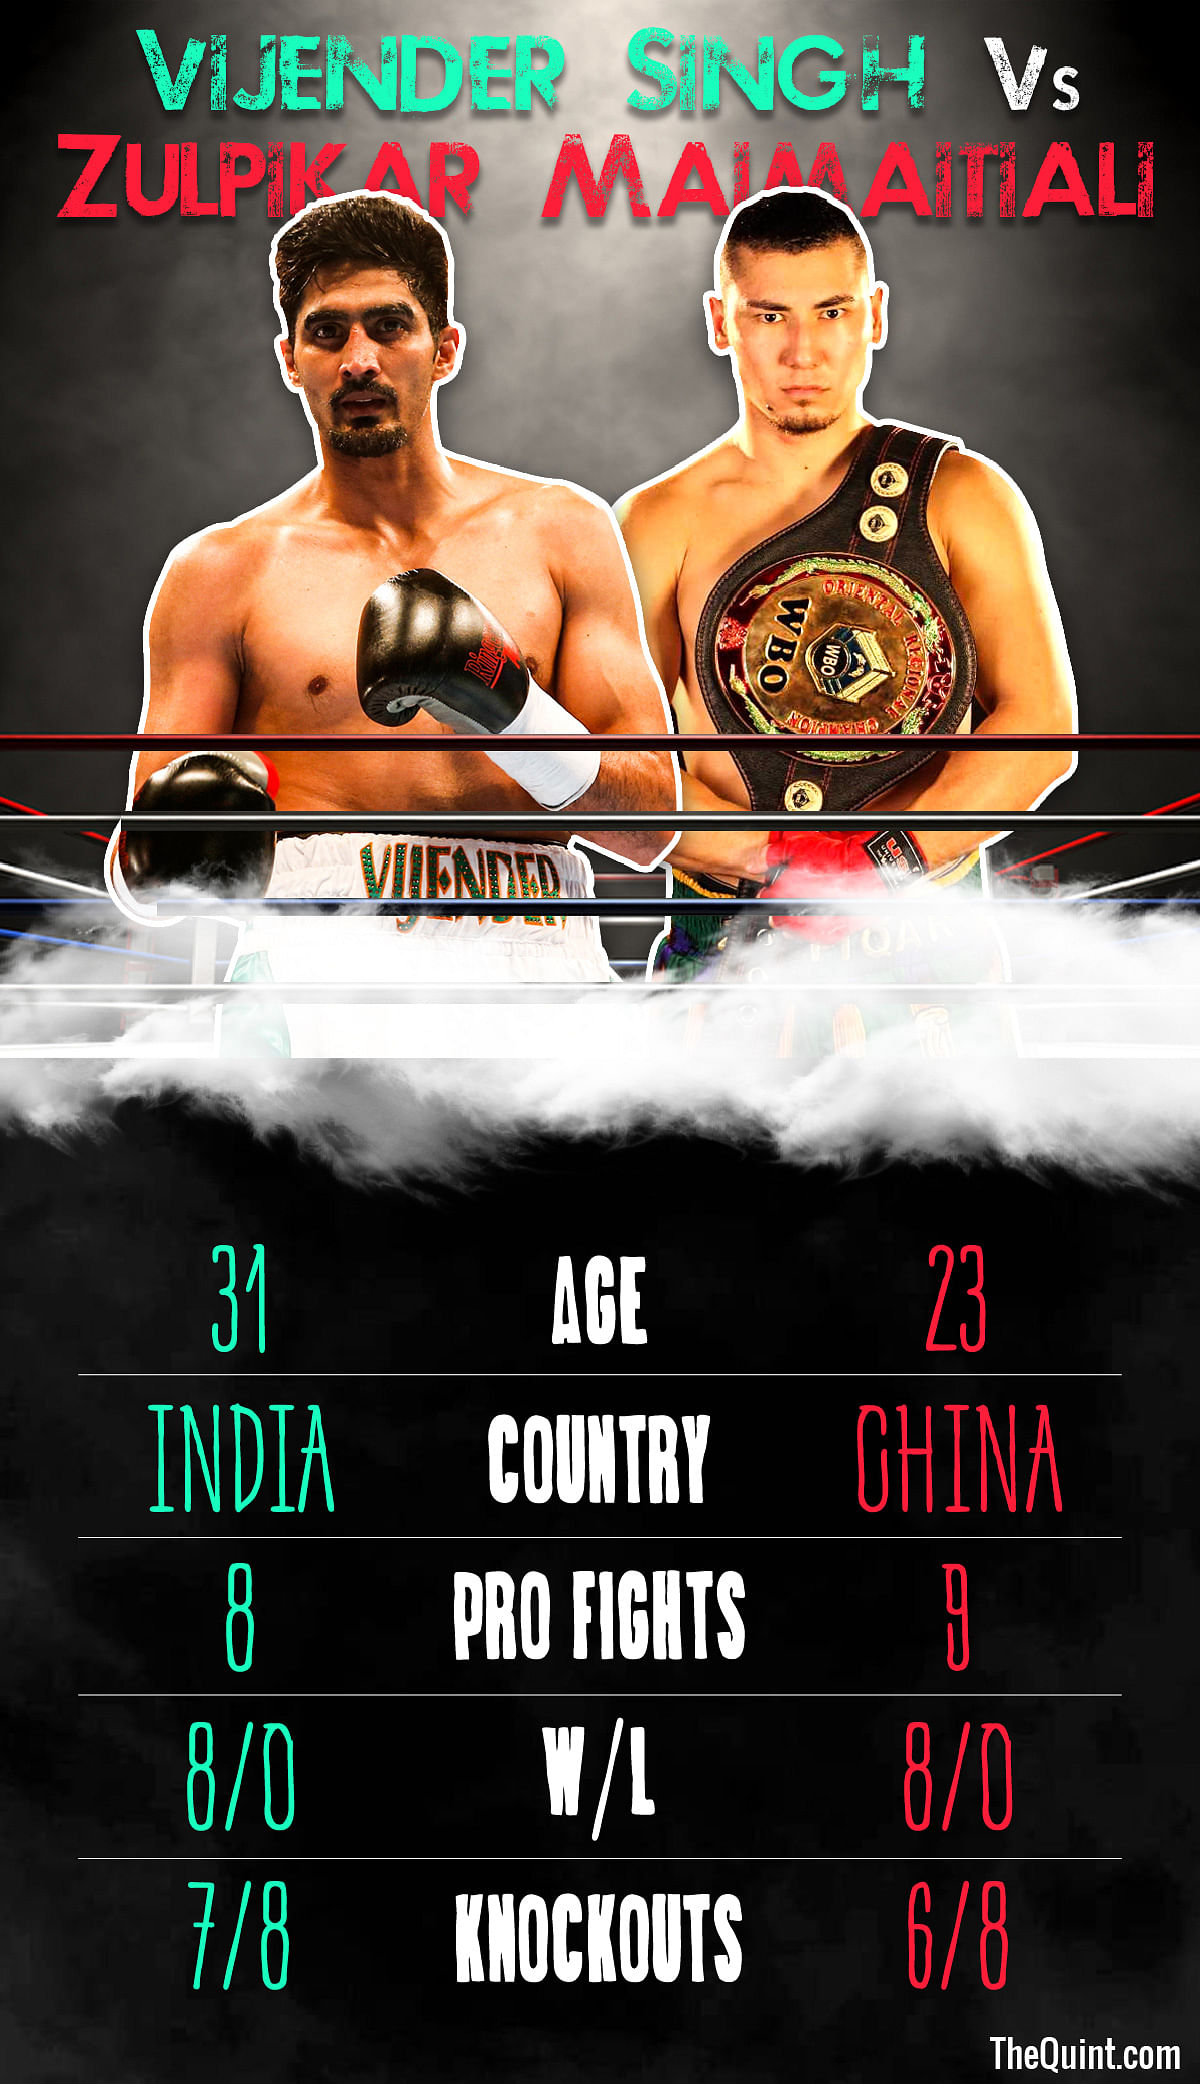 India’s boxing star Vijender Singh asserted that he is confident of beating Zulpikar Maimaitiali on Saturday.